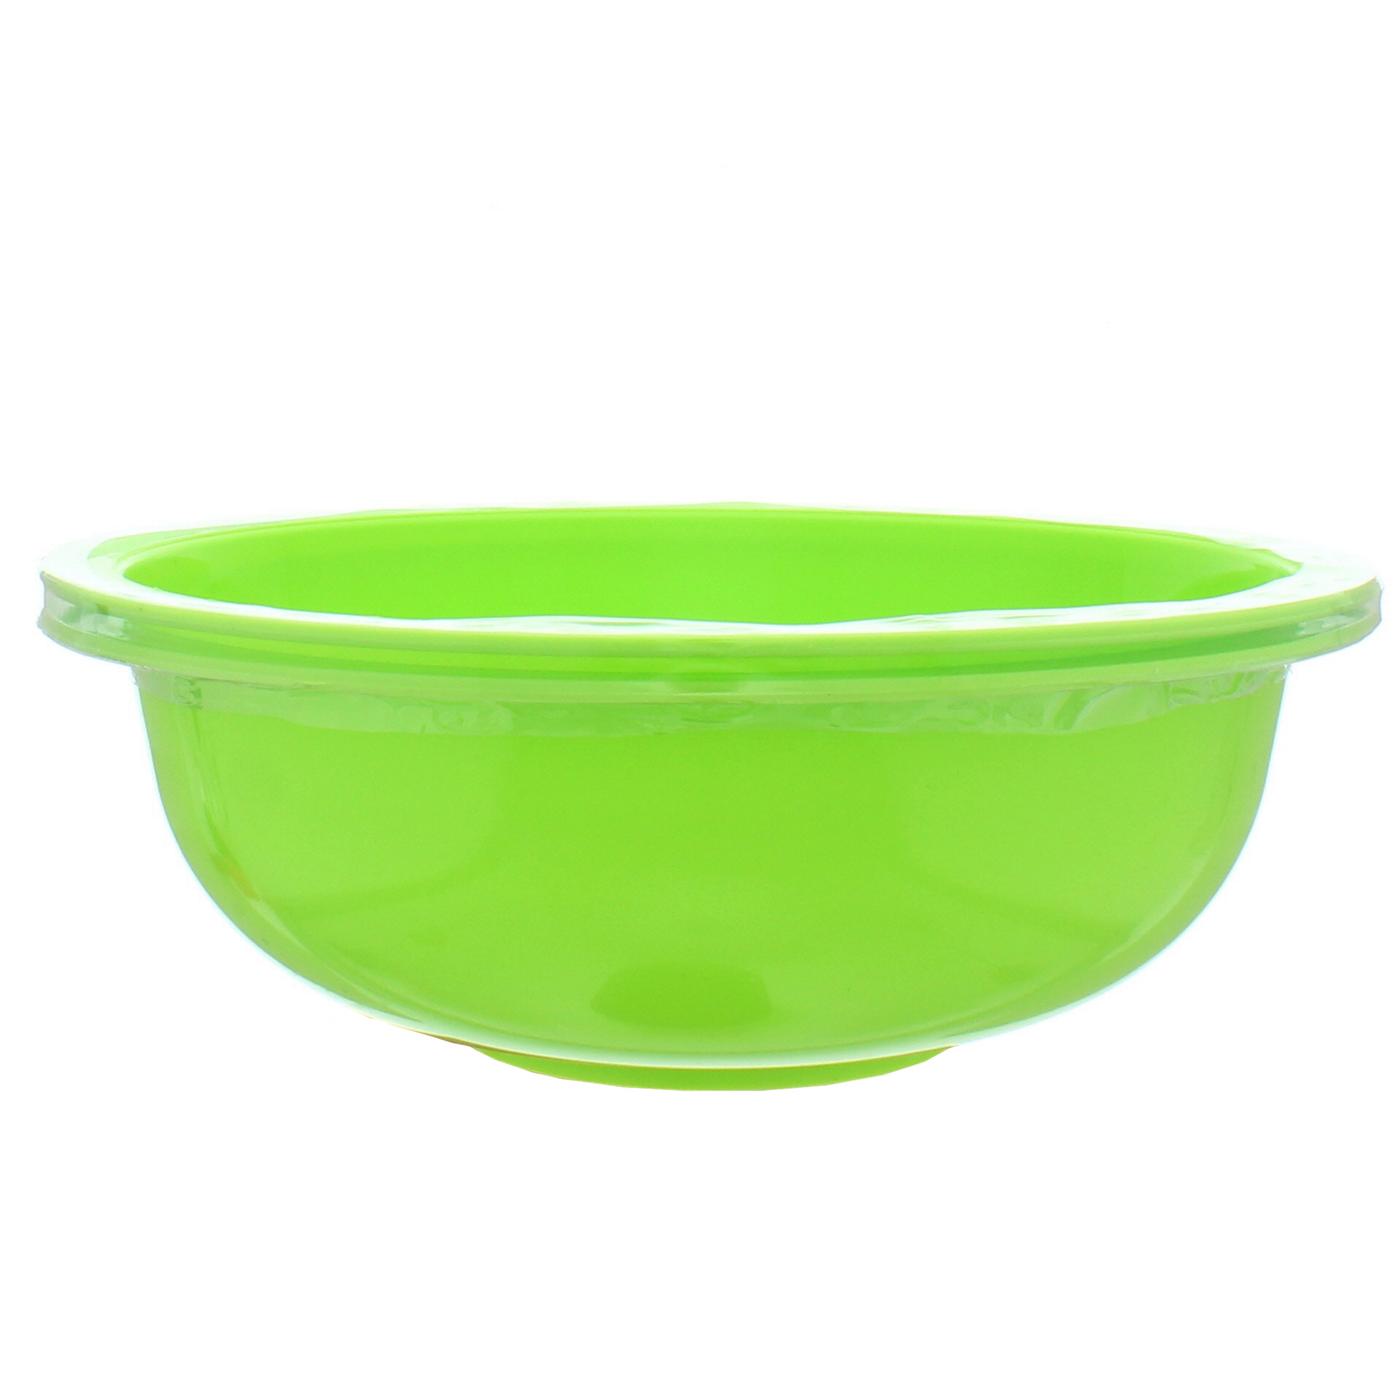 United Solutions Plastic Bowl, Pink or Green; image 2 of 2